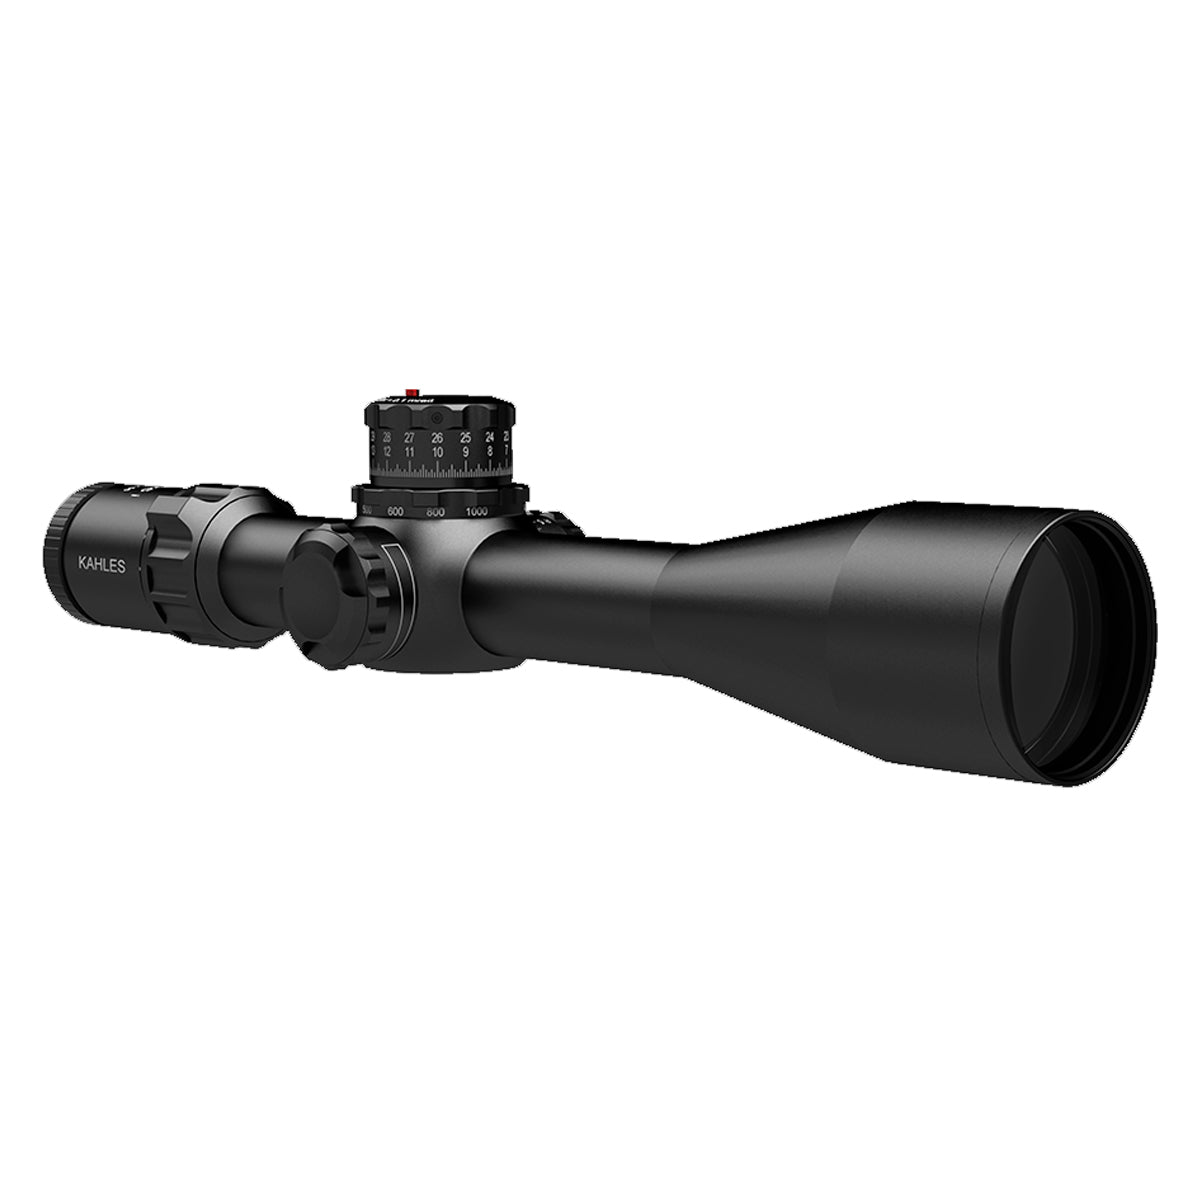 Kahles K525i 5-25x56 CCW SKMR4 w-left in  by GOHUNT | Kahles - GOHUNT Shop